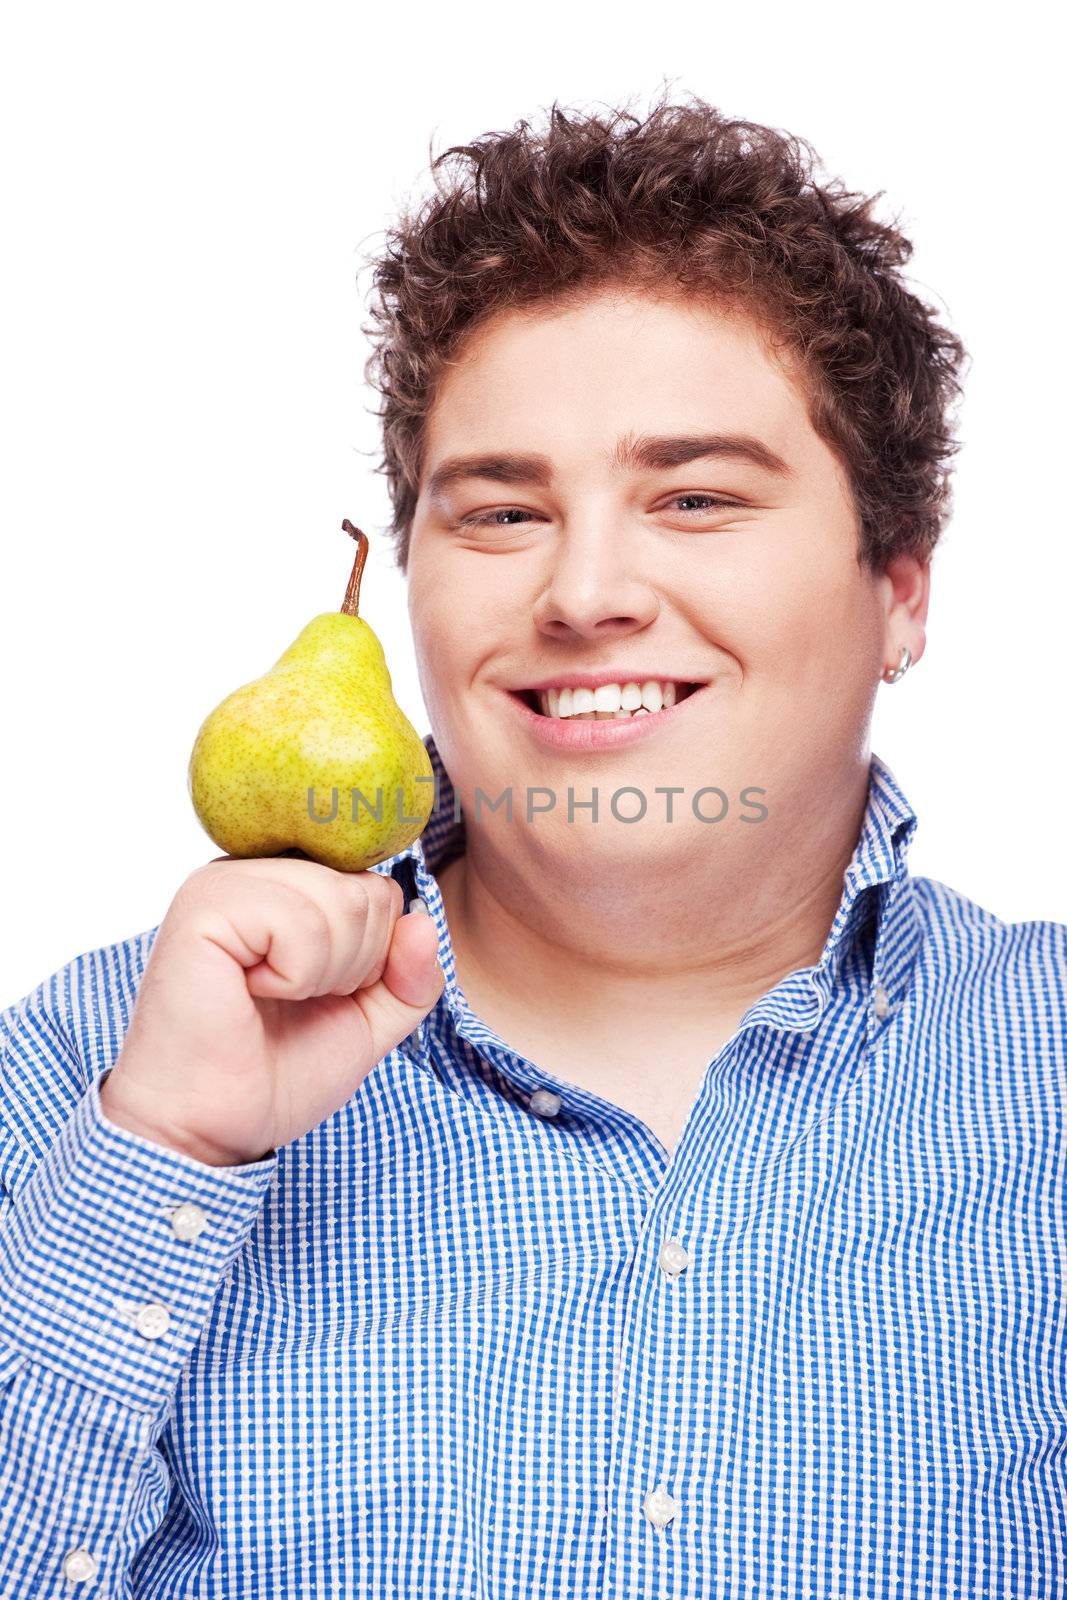 Chubby boy and pear by imarin